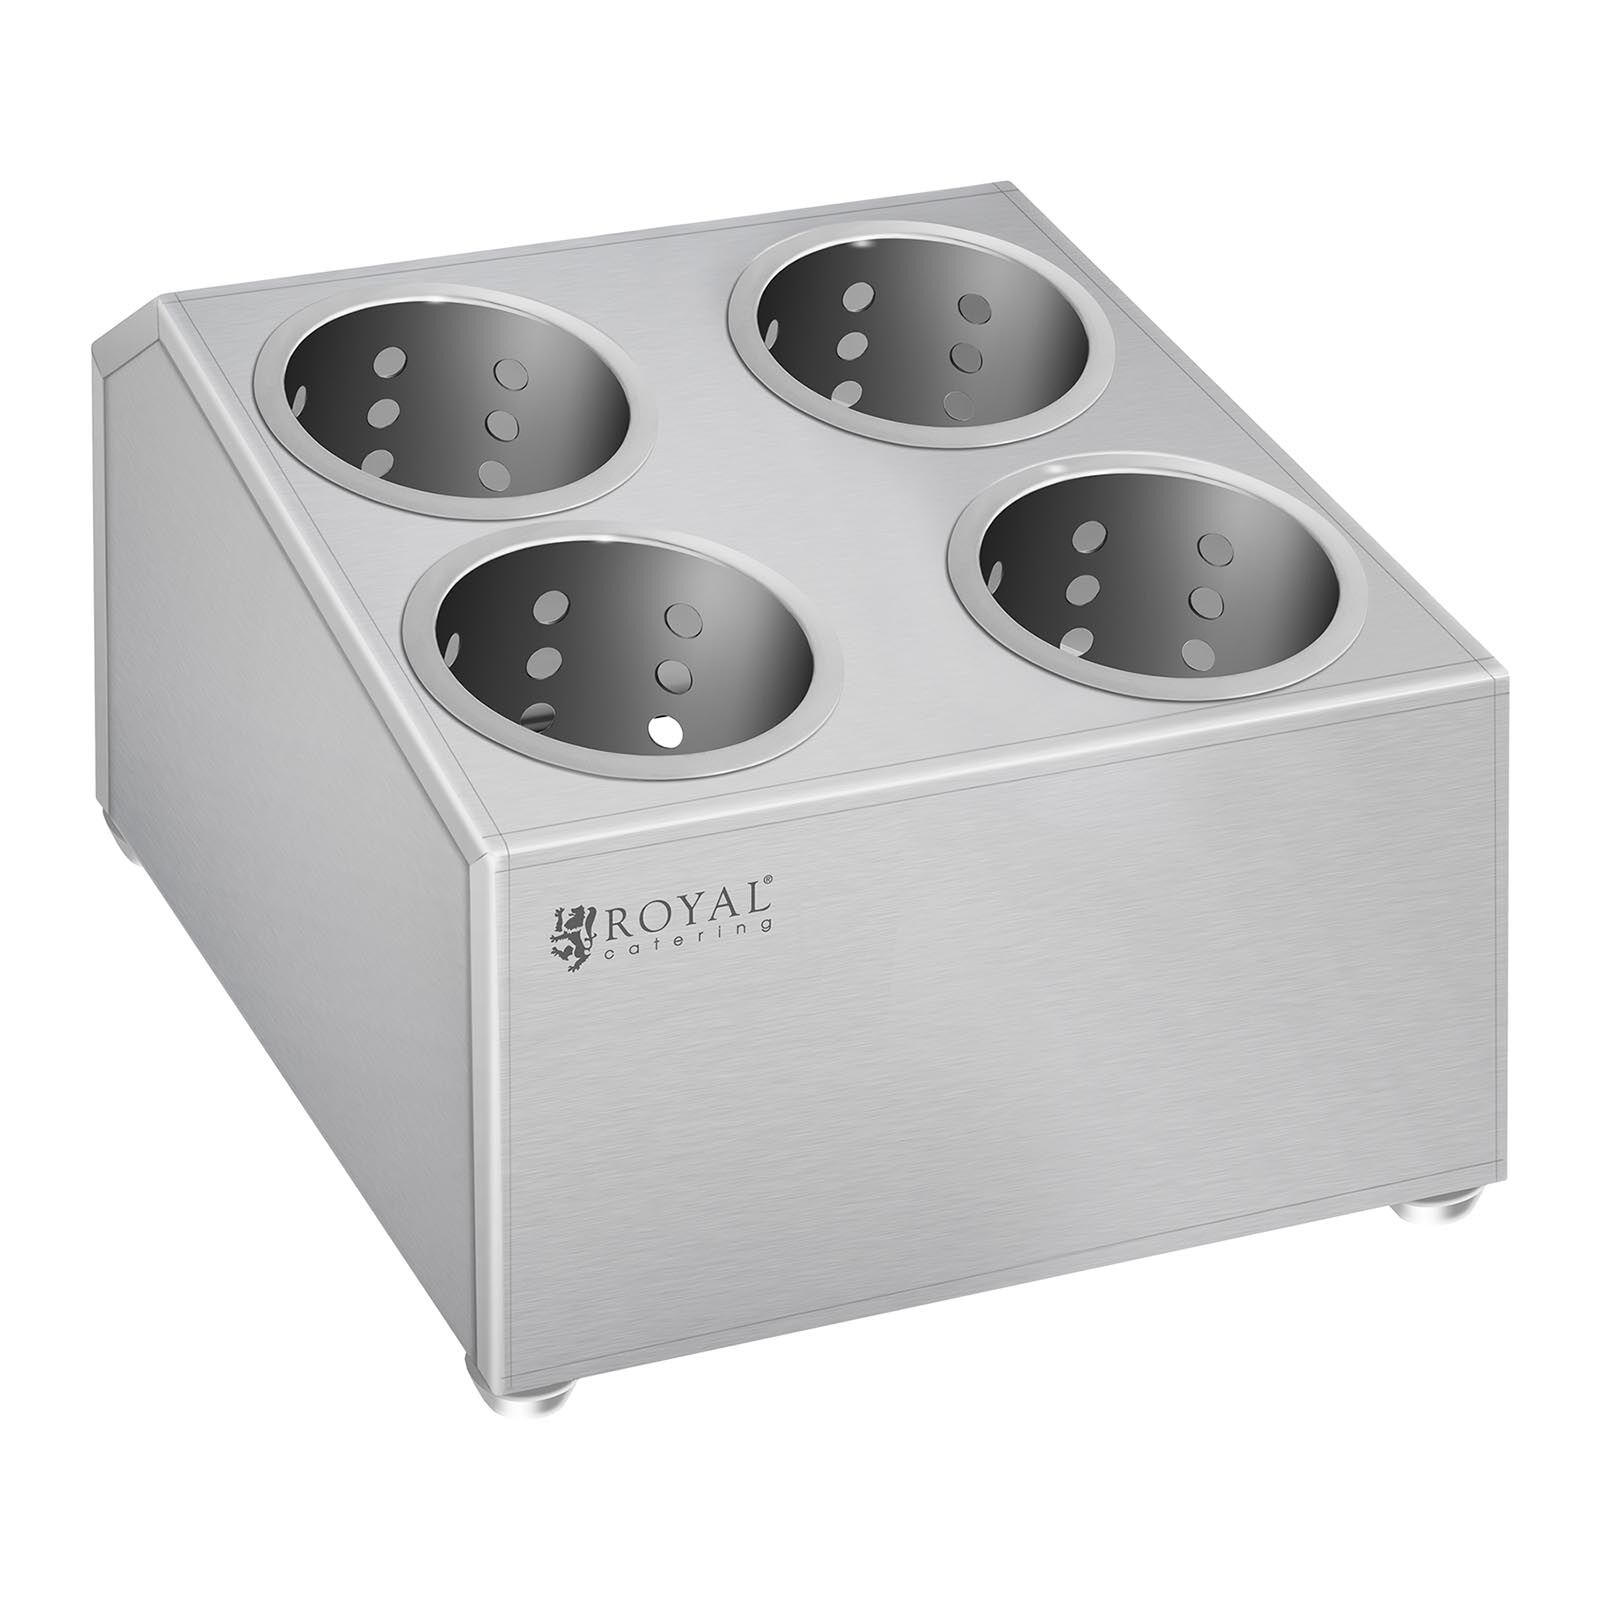 Royal Catering Cutlery container - Stainless steel - With 4 cutlery holders RCCH-1H4C